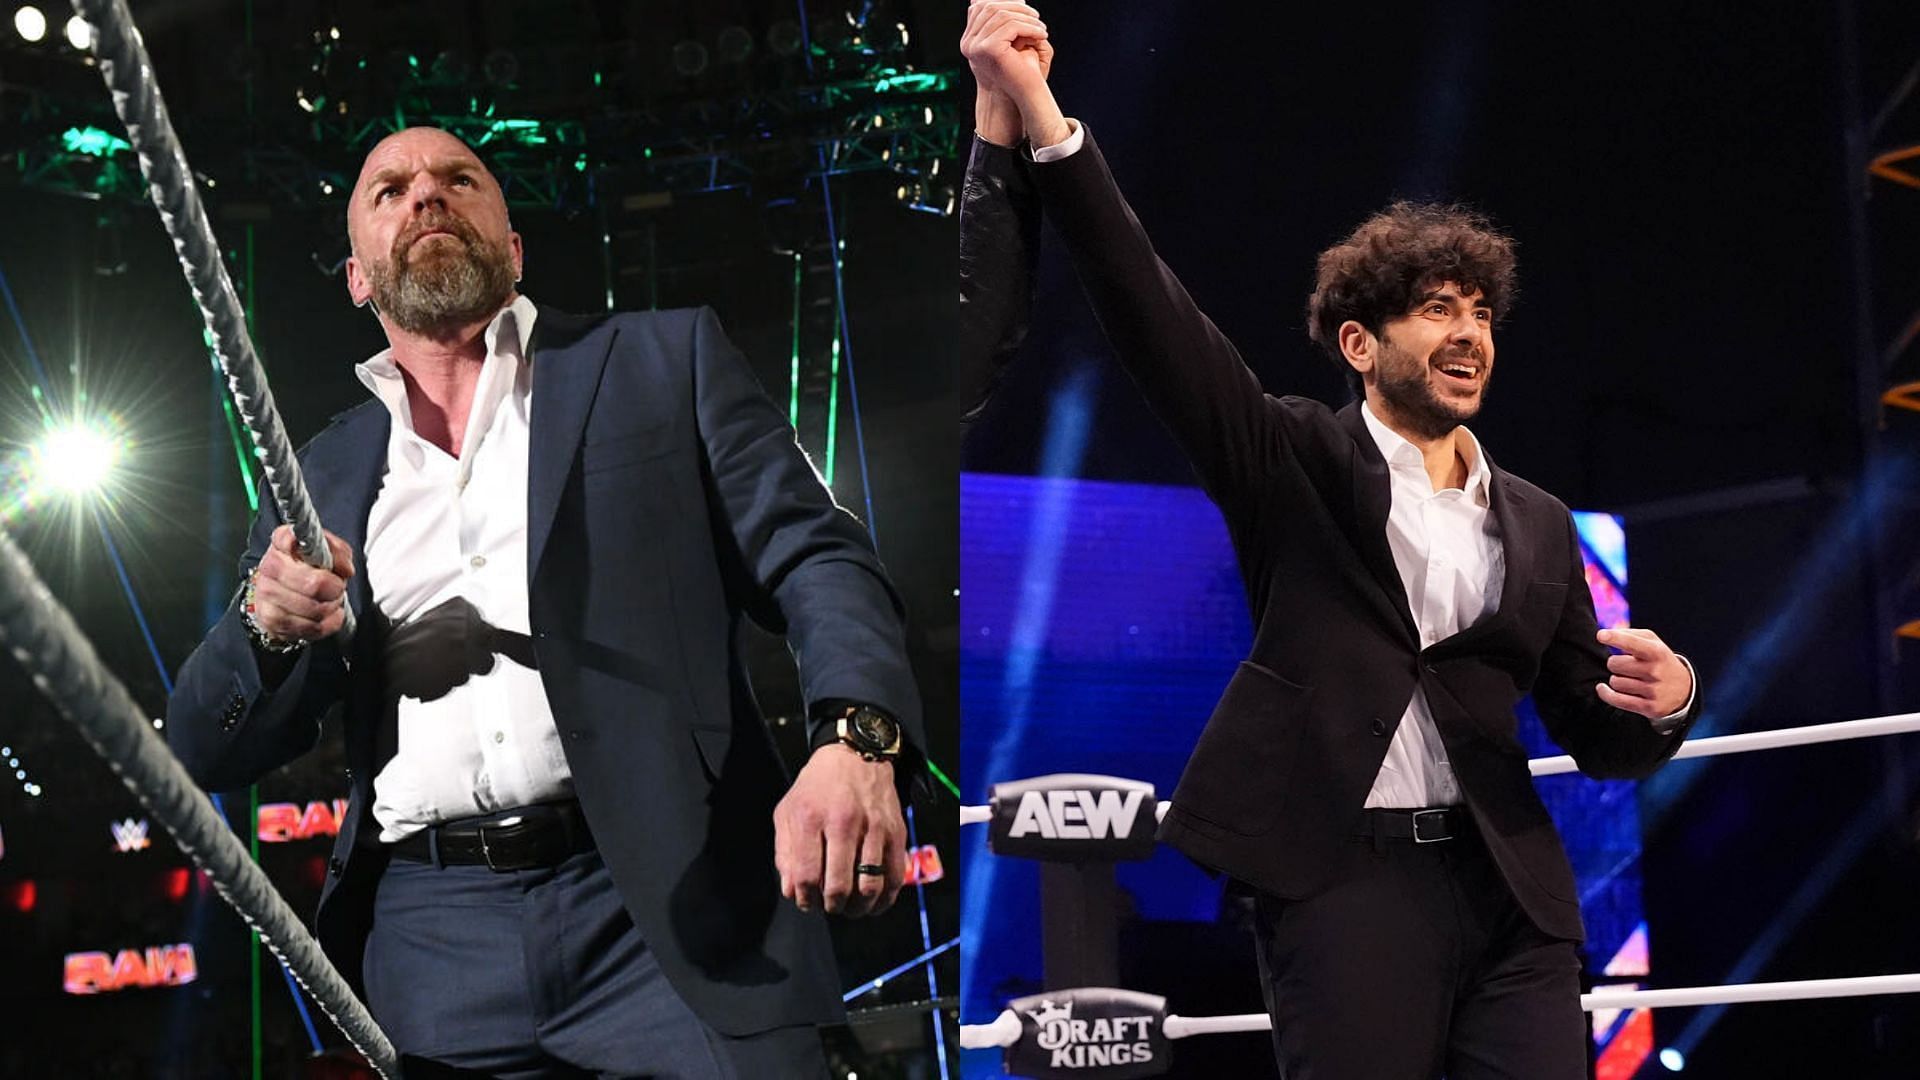 Triple H and Tony Khan are big names in WWE and AEW respectively [Photo courtesy of WWE and AEW